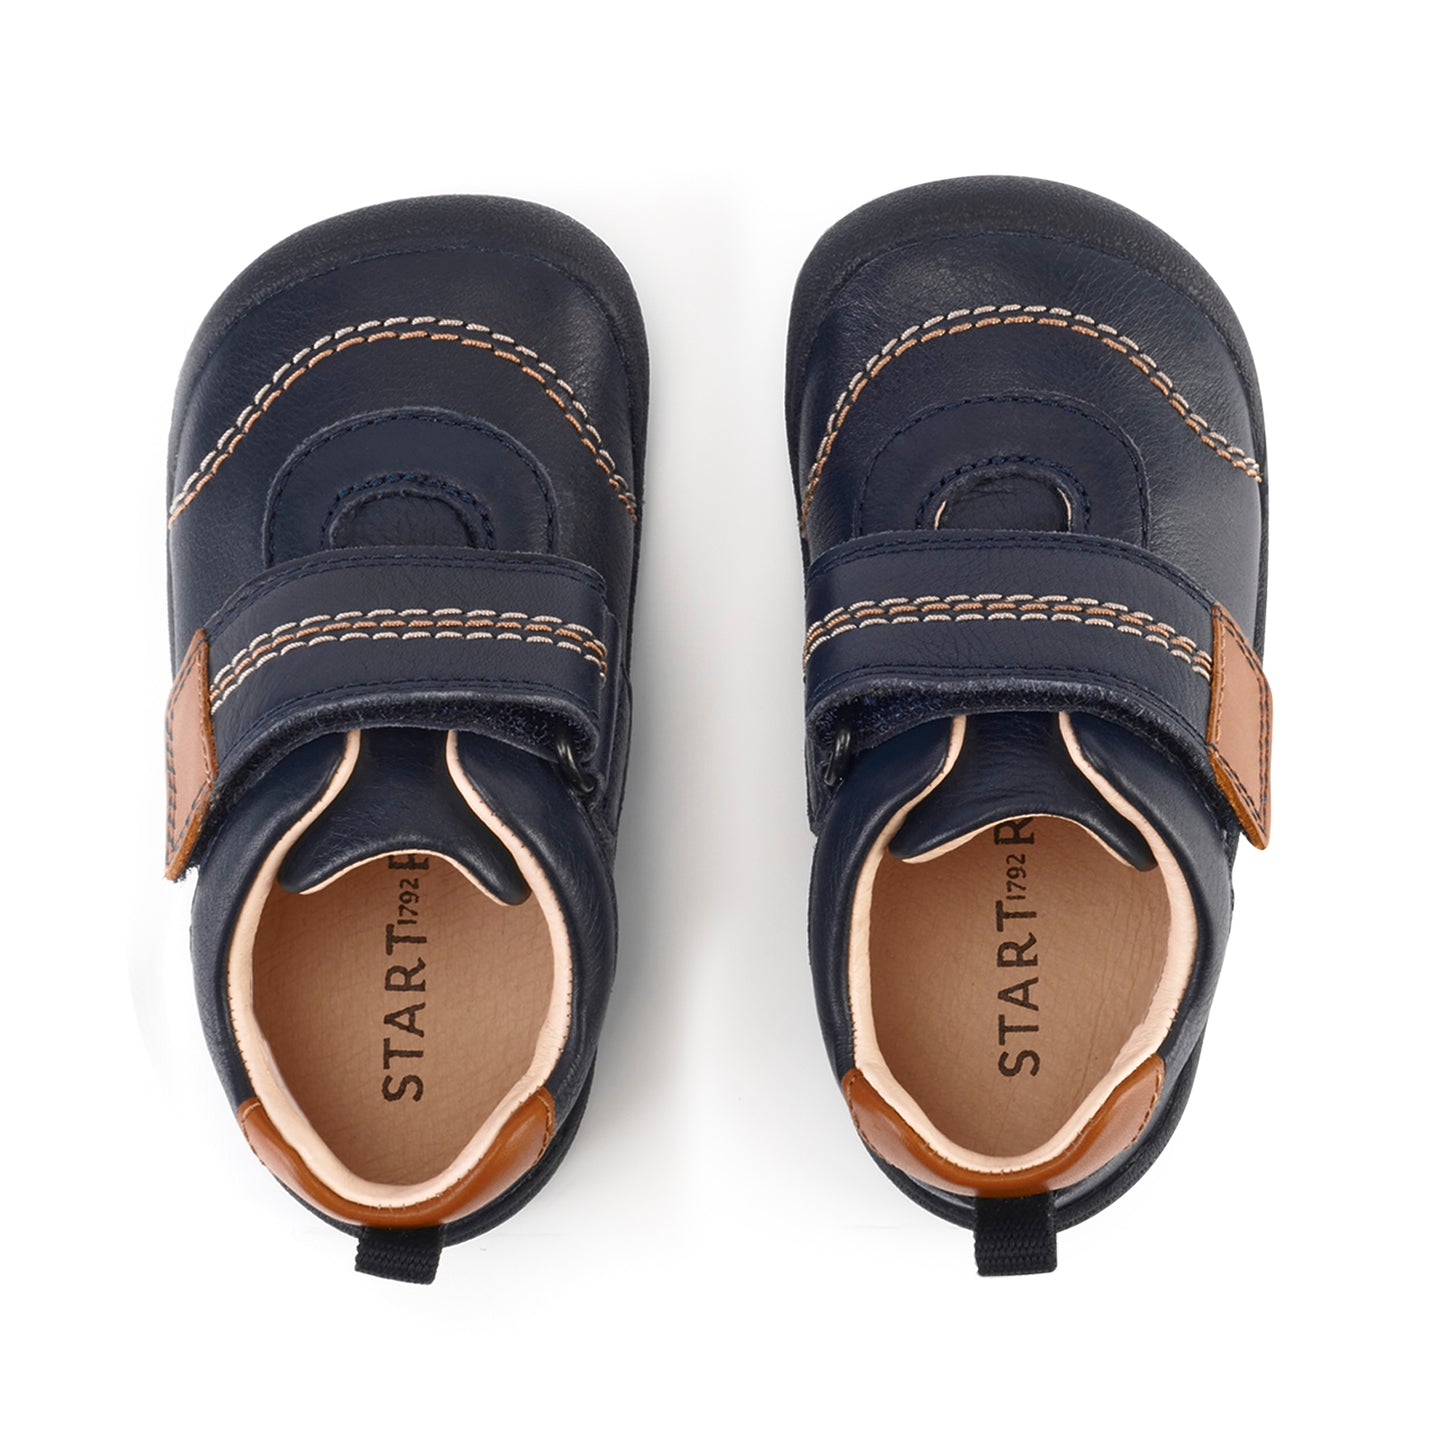 A boys first shoe by Start-Rite, style Footprint, in navy with tan trim and stitch detailing, velcro fastening. Above view of a pair.